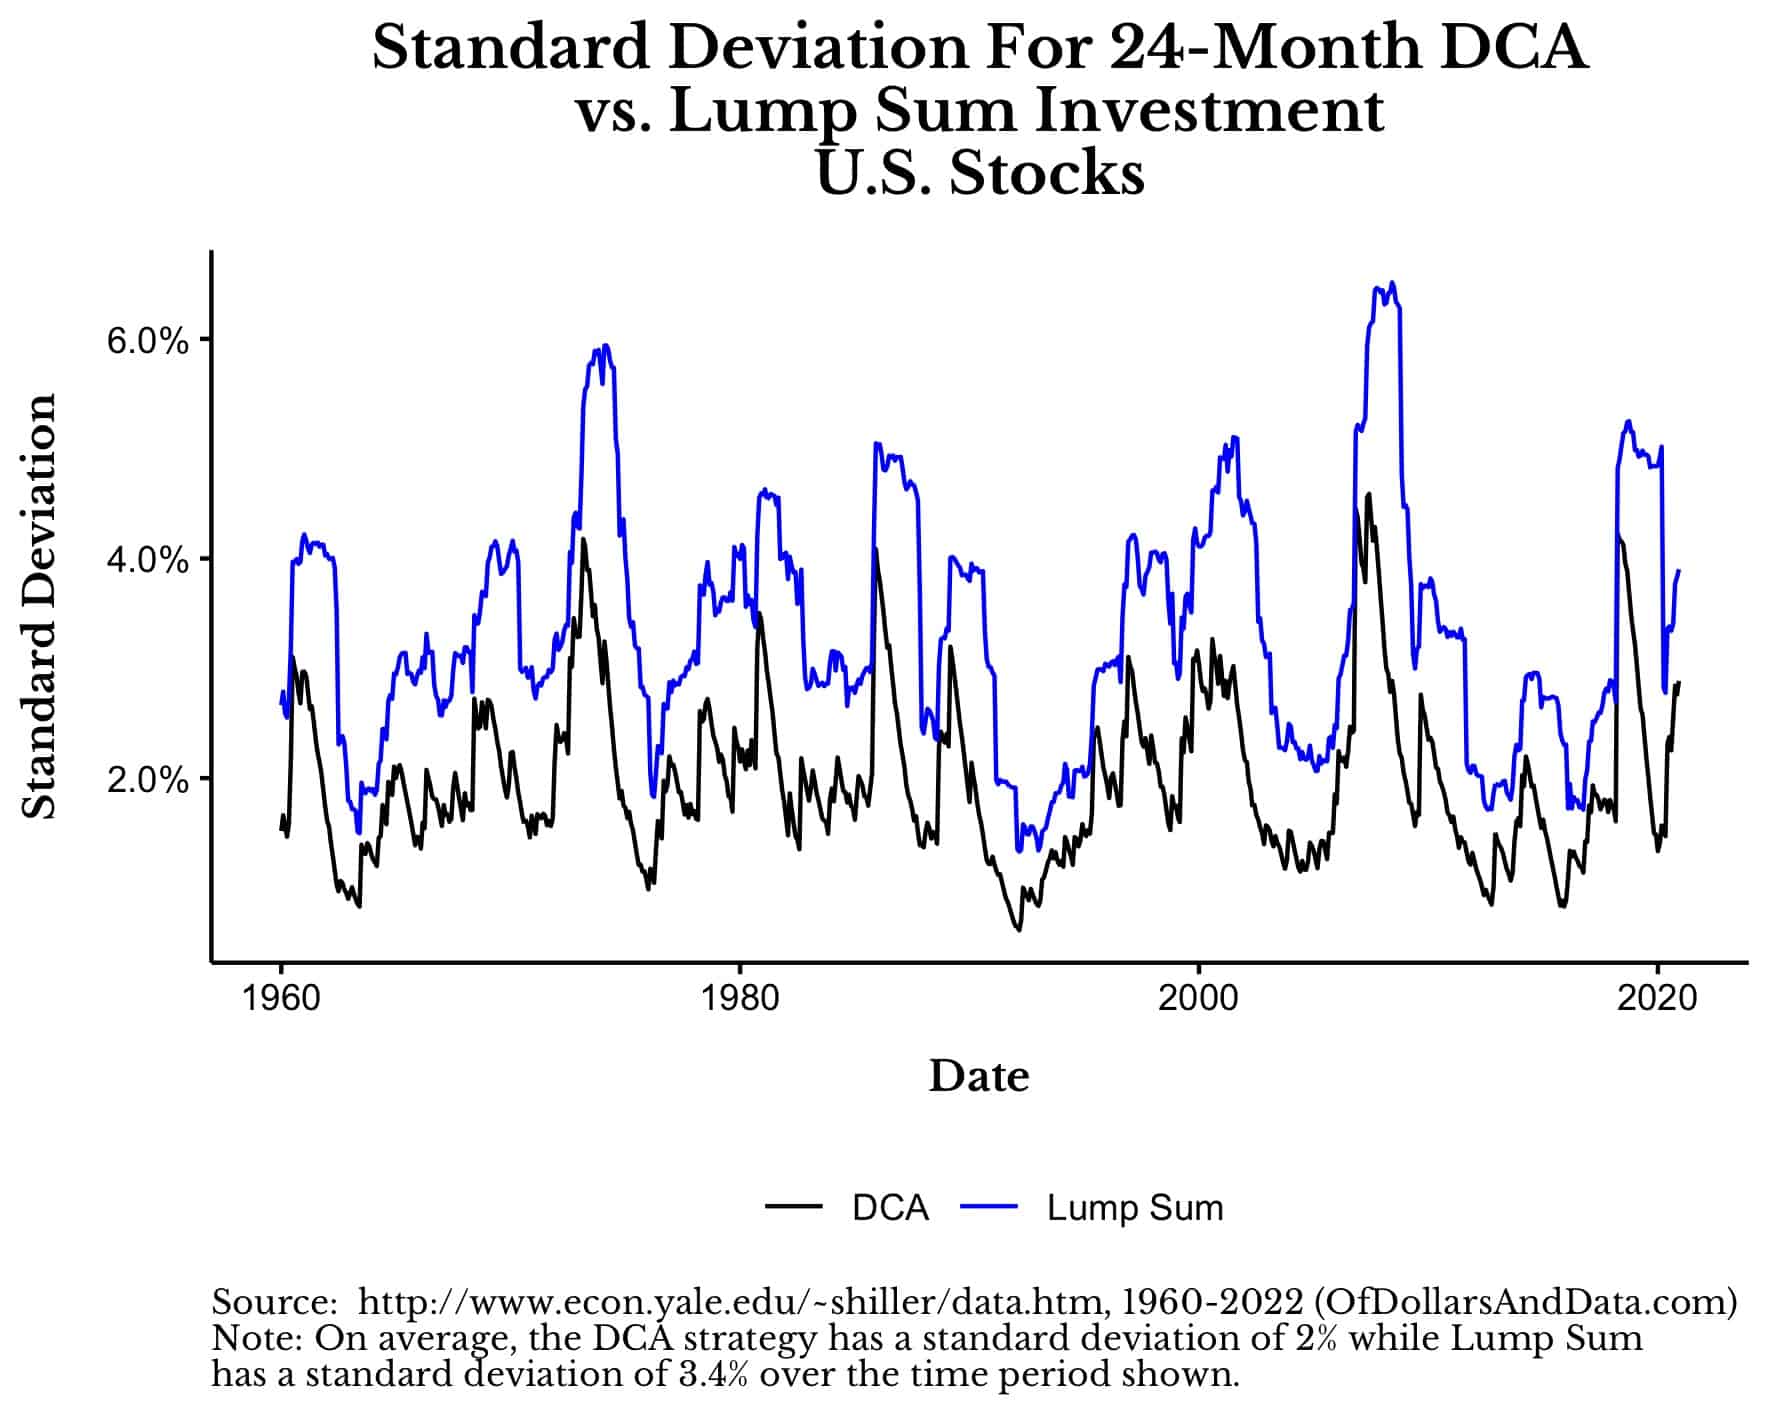 Standard deviation of DCA vs. Lump Sum performance into U.S. stocks from 1960-2022.